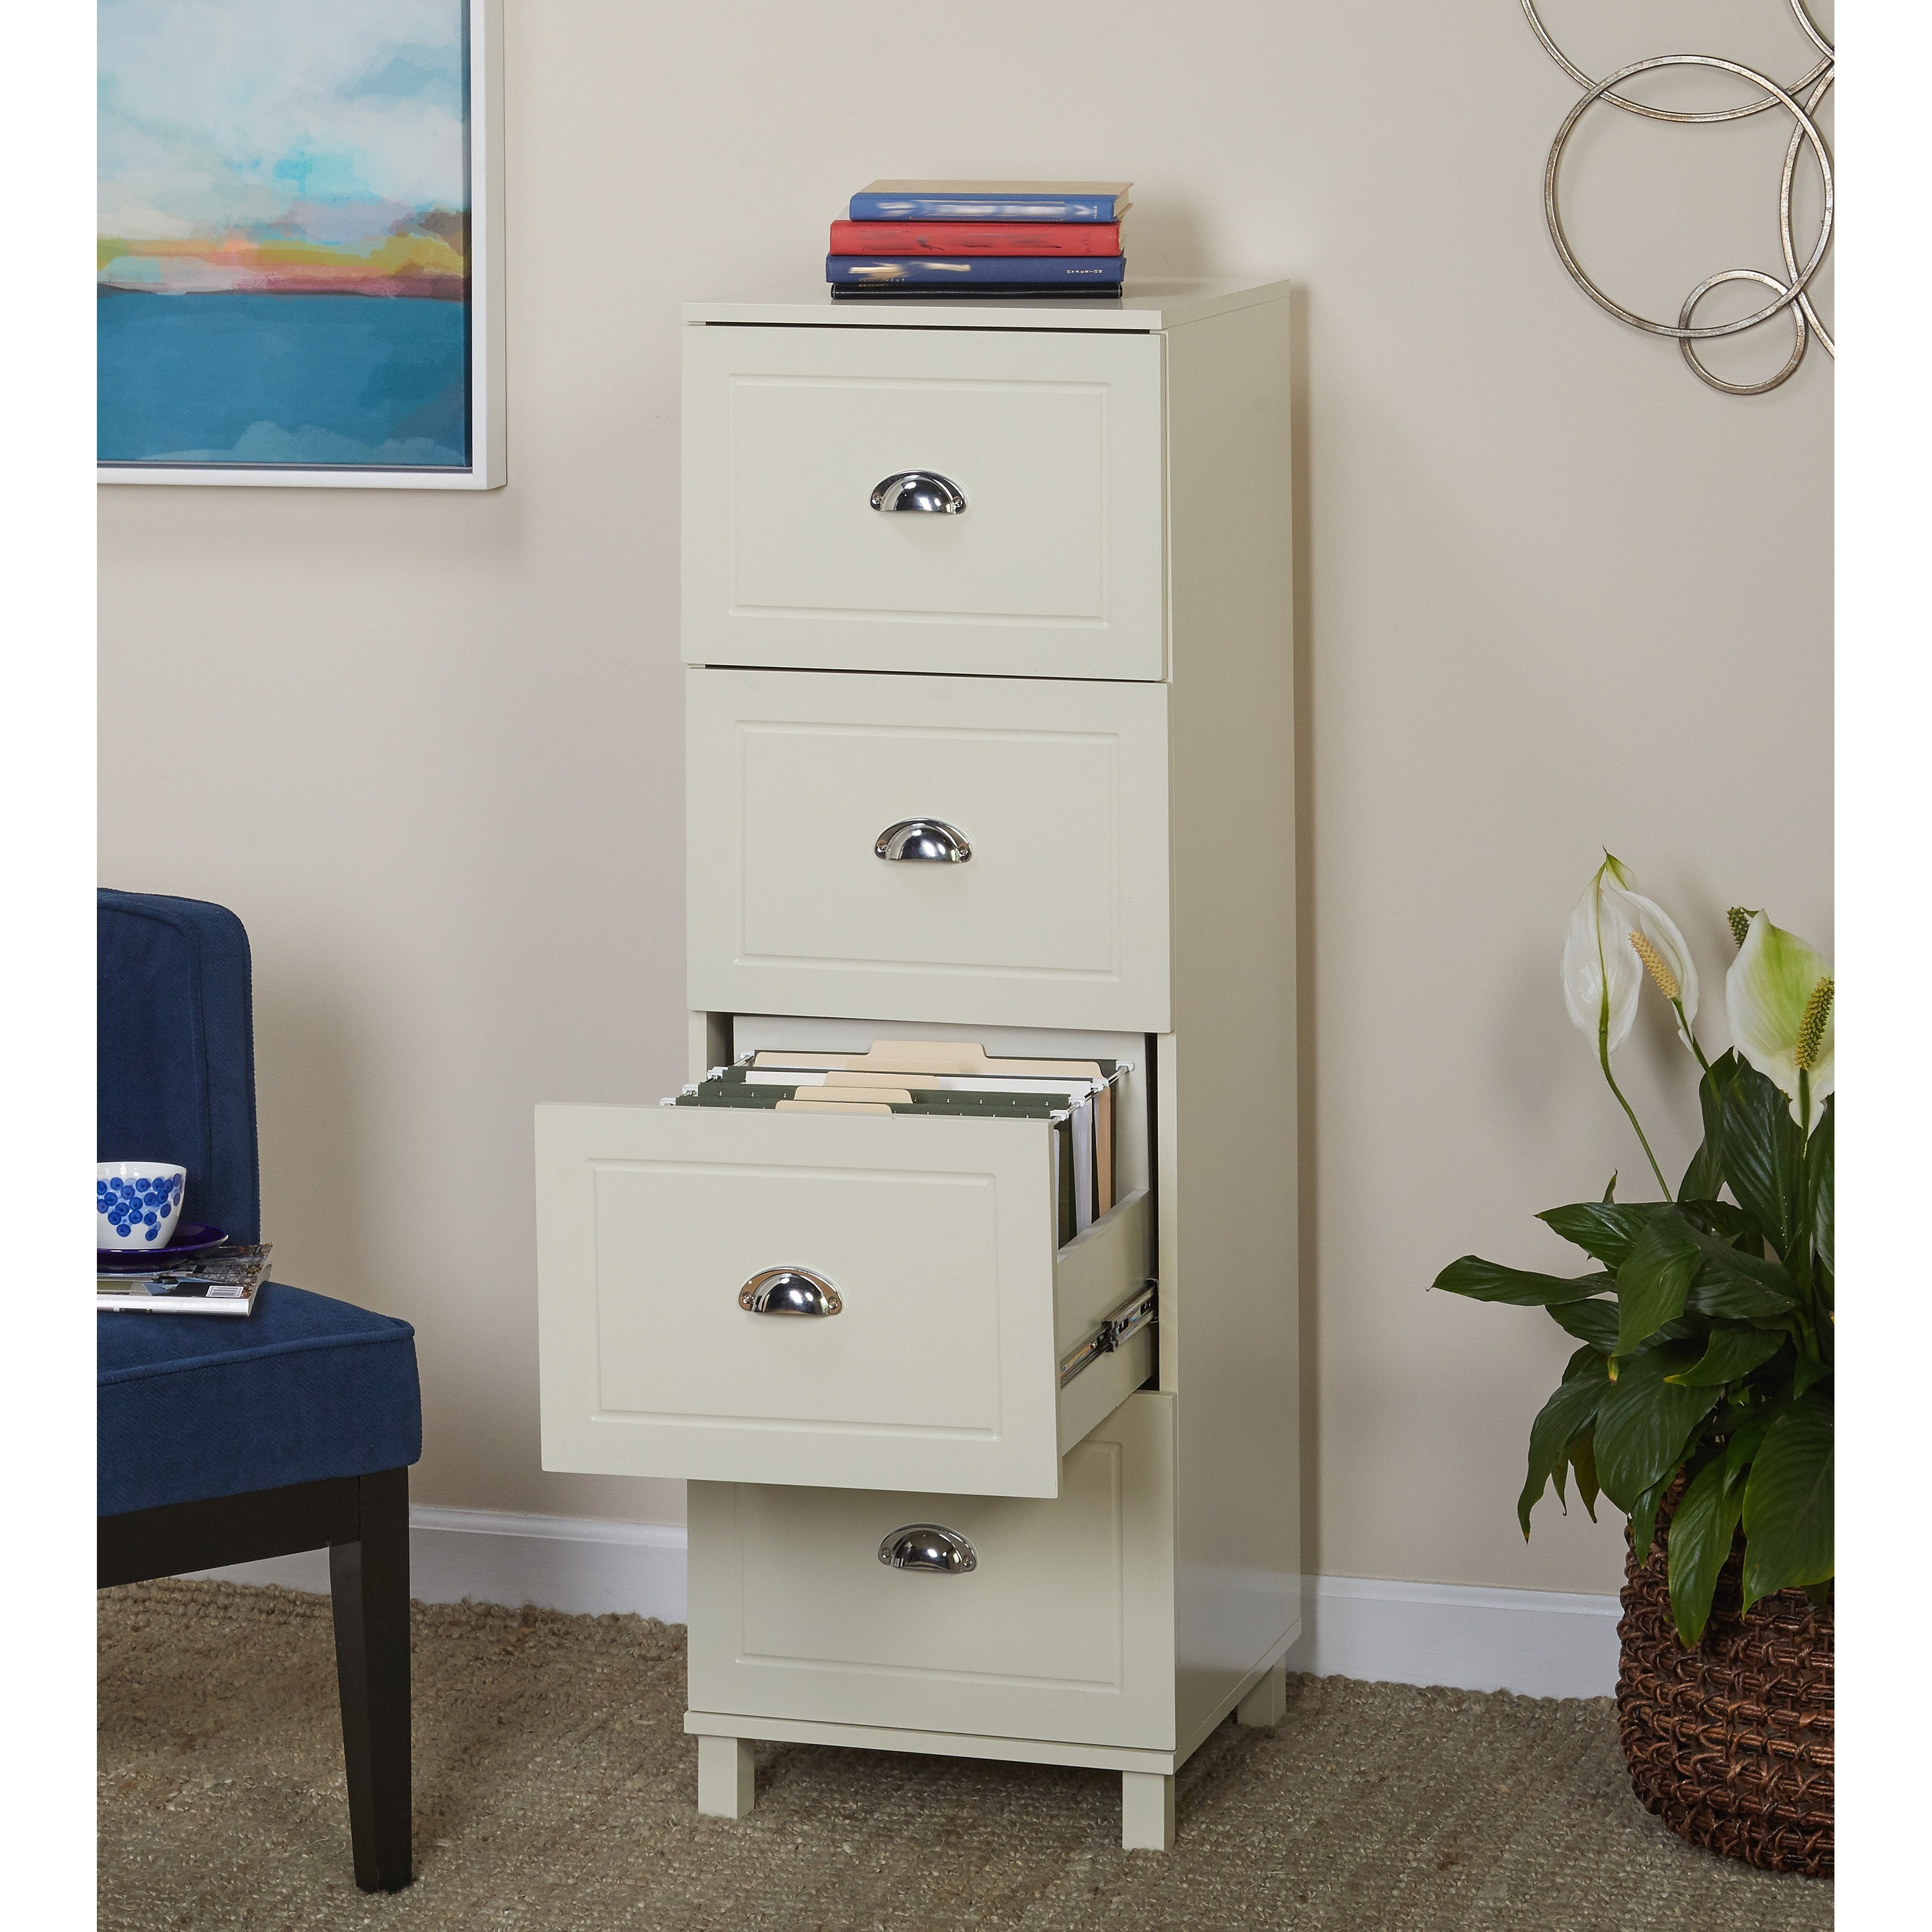 Bradley 4 Drawer Vertical Wood Filing Cabinet White Walmart for proportions 2891 X 2891